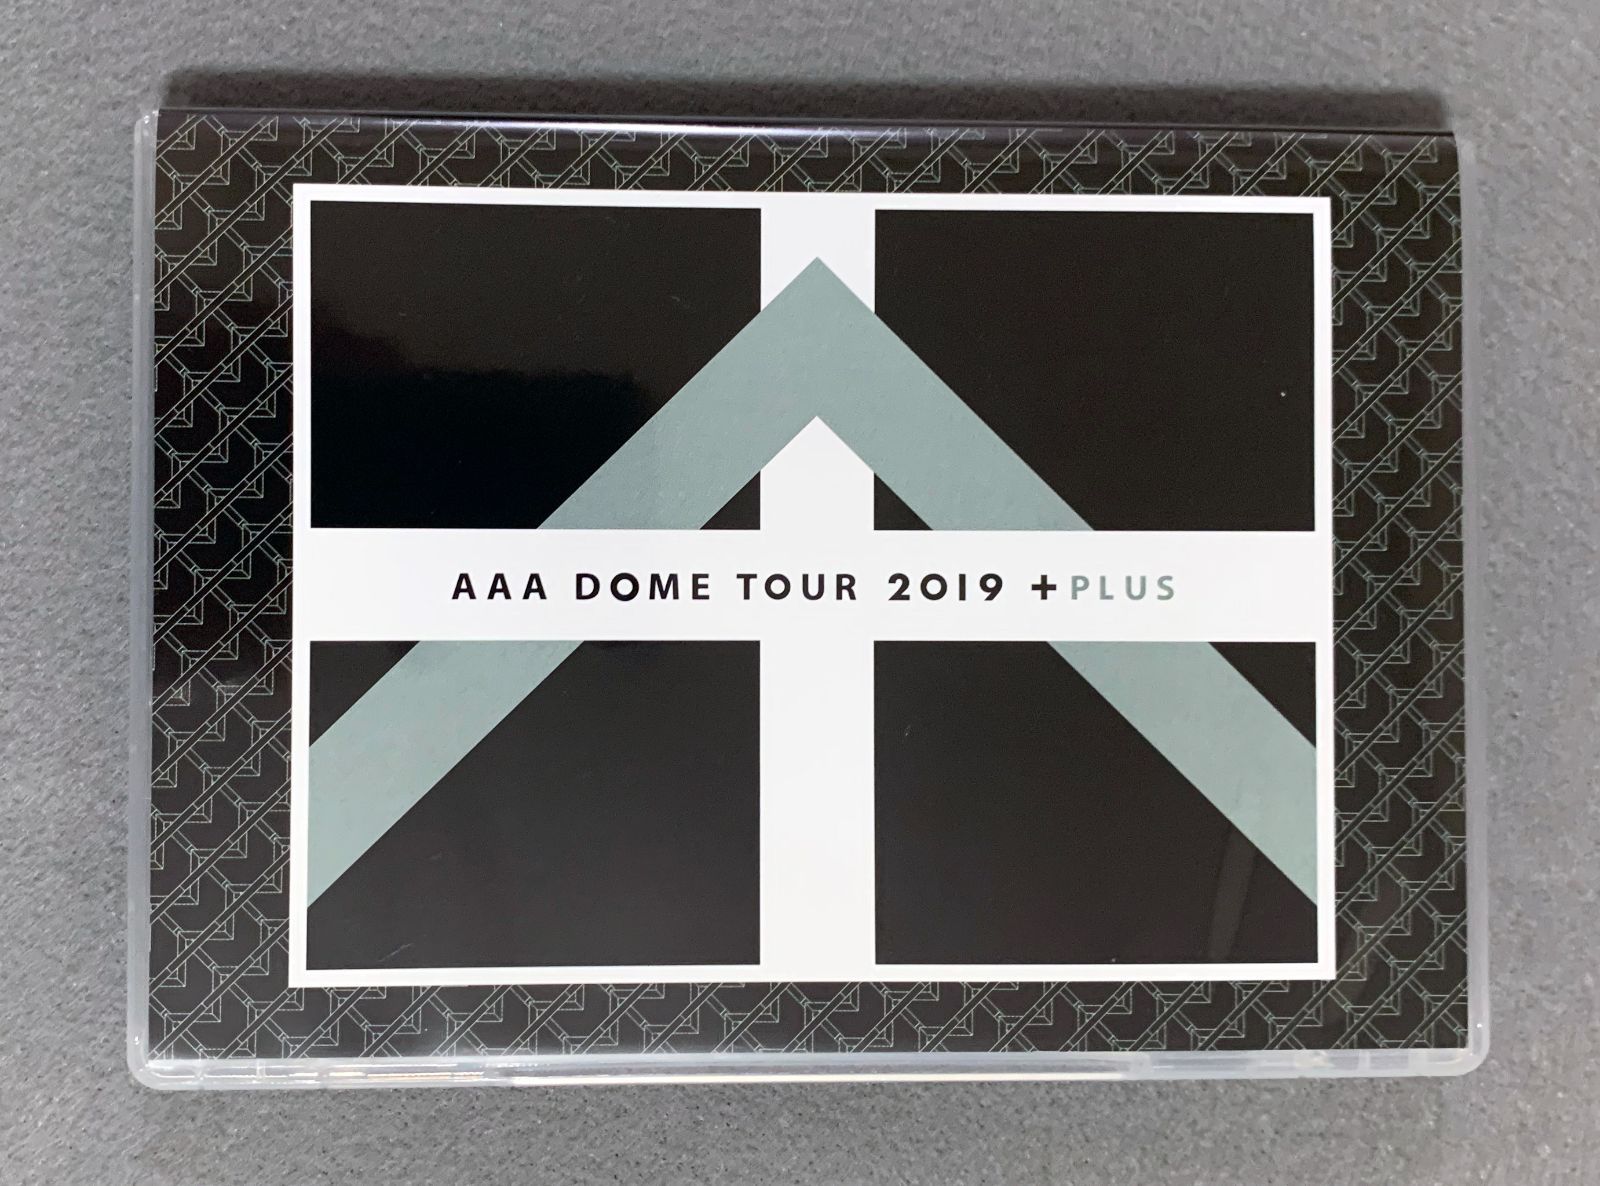 AAA DOME TOUR 2019 +PLUS 初回生産限定盤 DVD - ミュージシャン